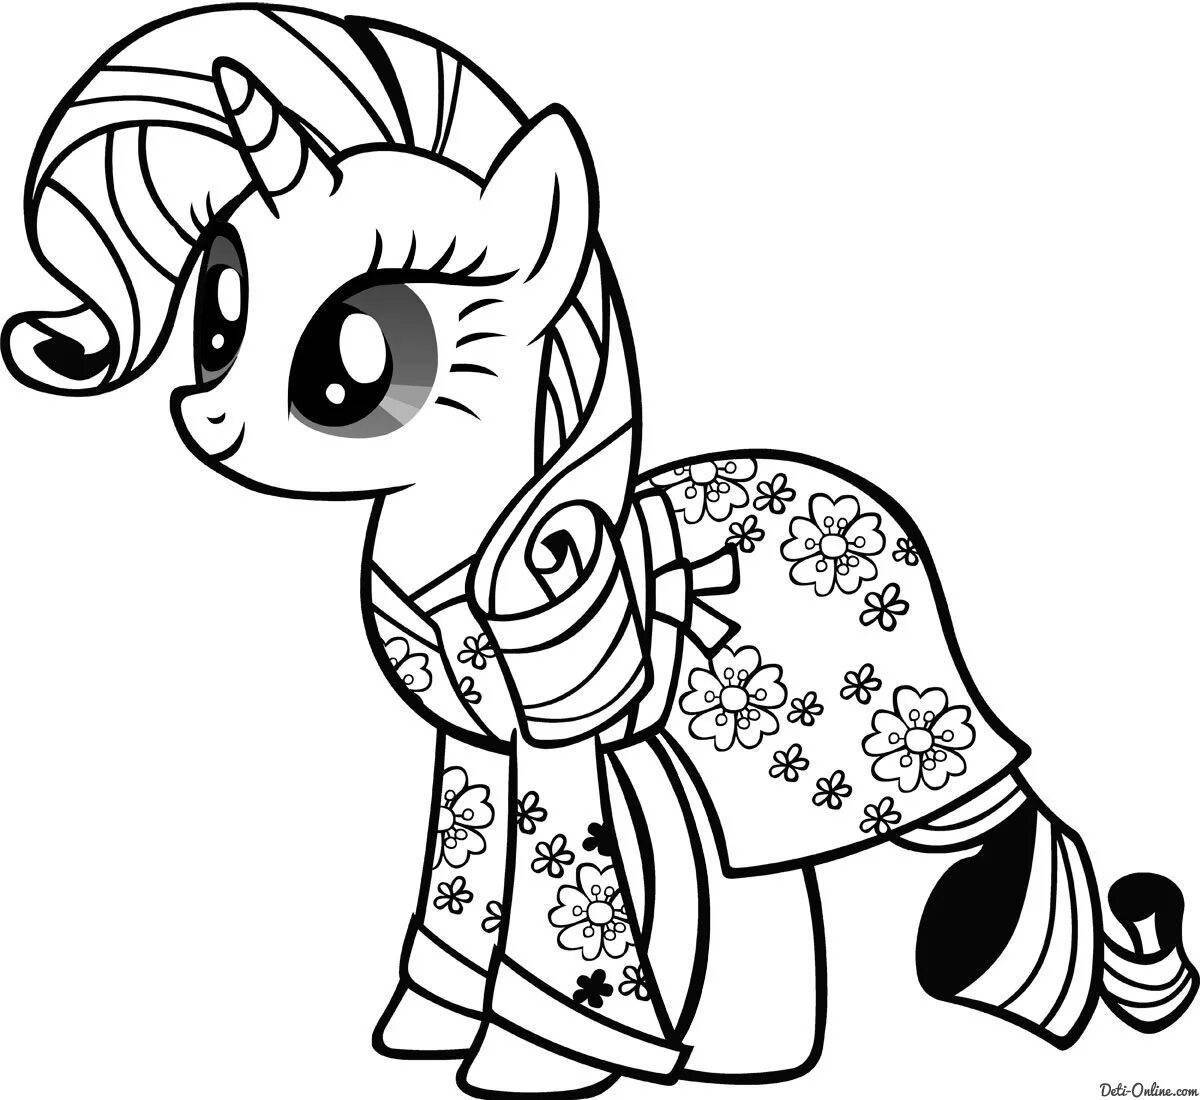 May little pony coloring page #8